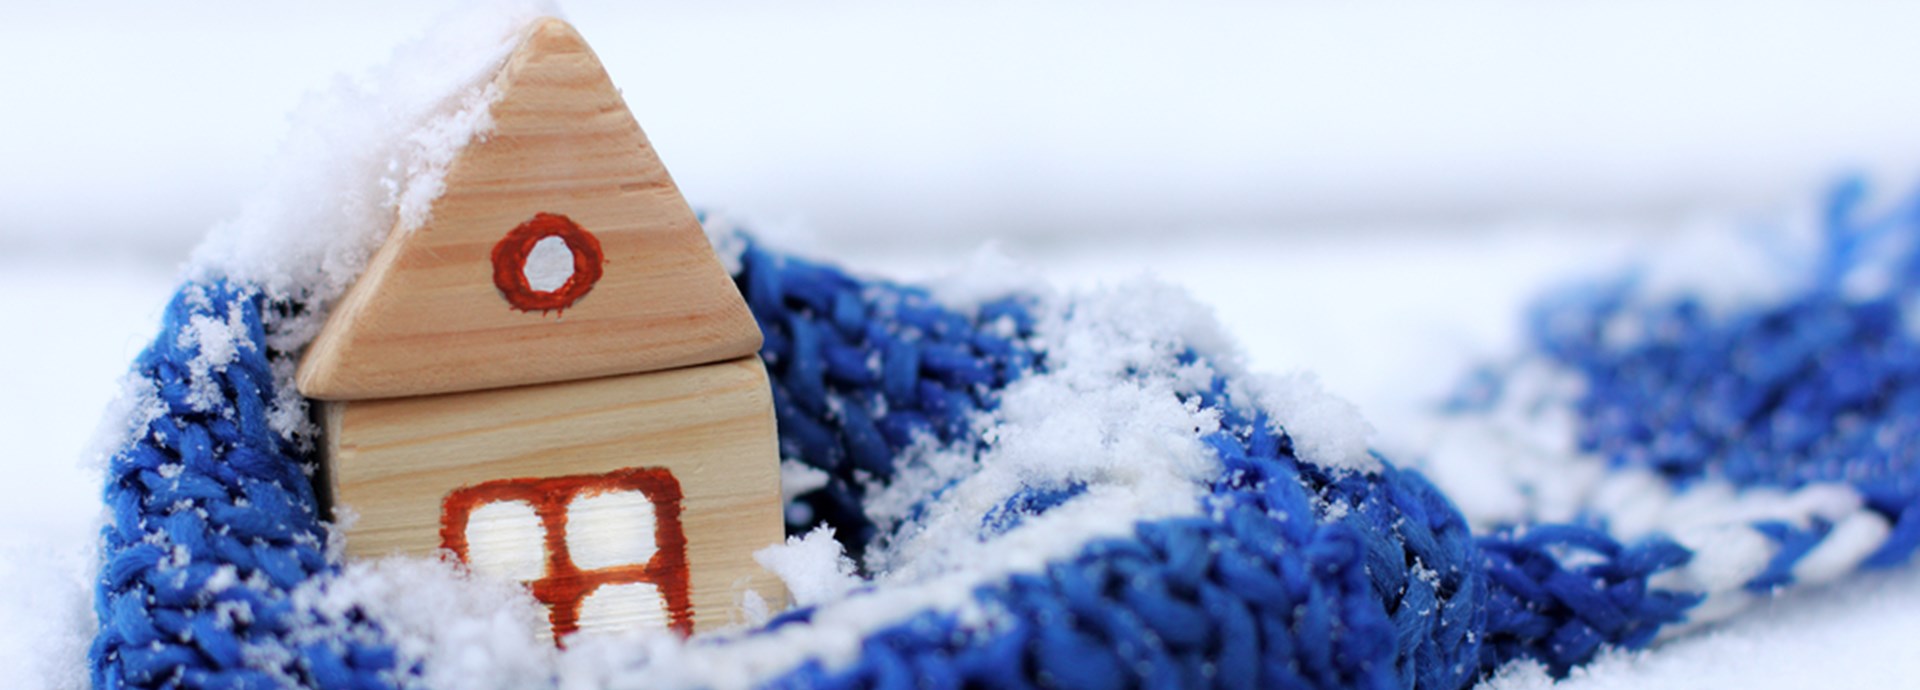 warming blue scarf around a wooden house in the winter season